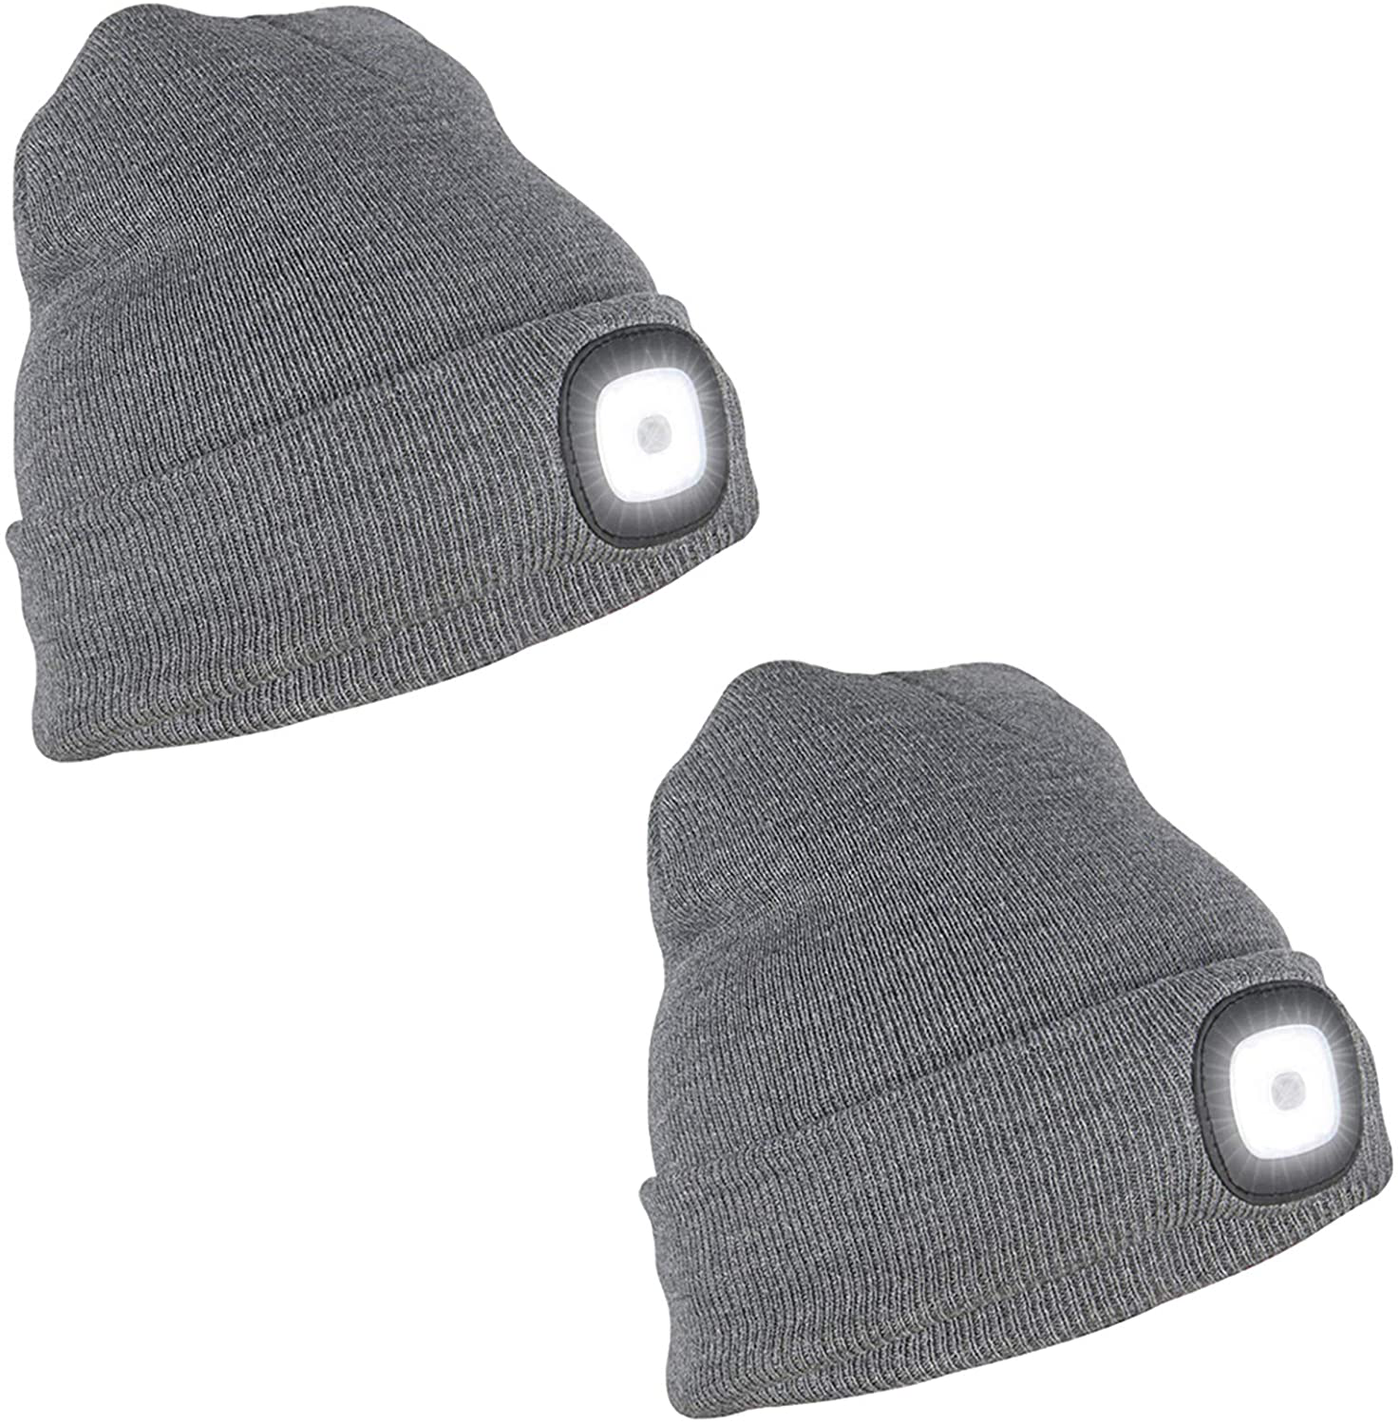 Knitted Unisex Beanie Hat with Light, USB Rechargeable LED Headlamp Flashlight Hat